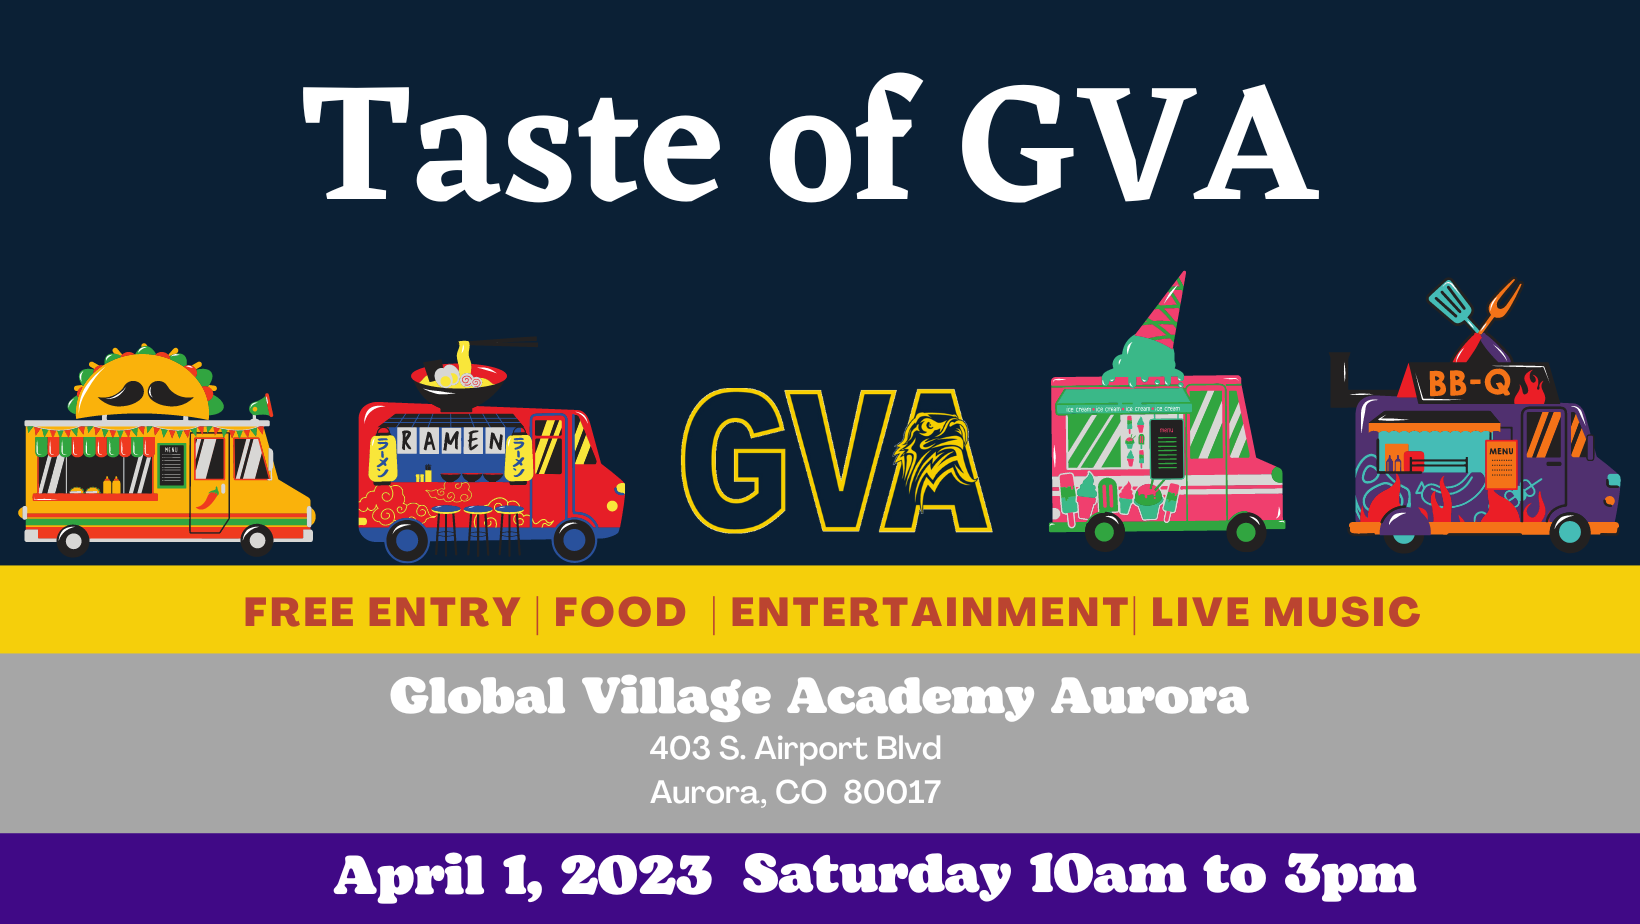 Taste of GVA on April 1 from 10am-3pm. Free entry, food, entertainment, live music at GVA Aurora East campus 403 S Airport Blvd Aurora Co 80017